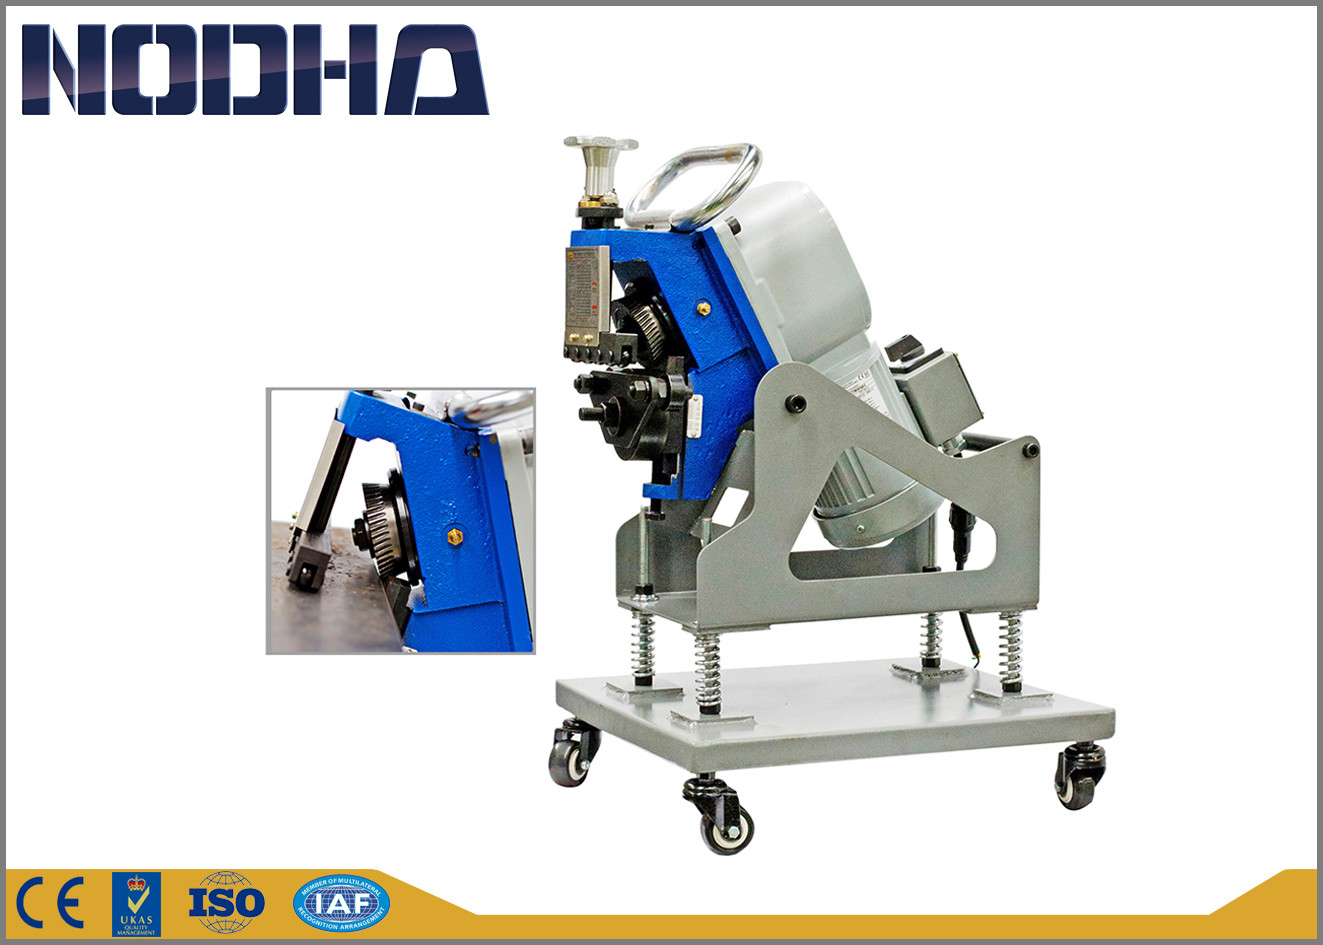 Small Plate Edge Beveling Machine With Adjustable Bevel Angle 1400RPM